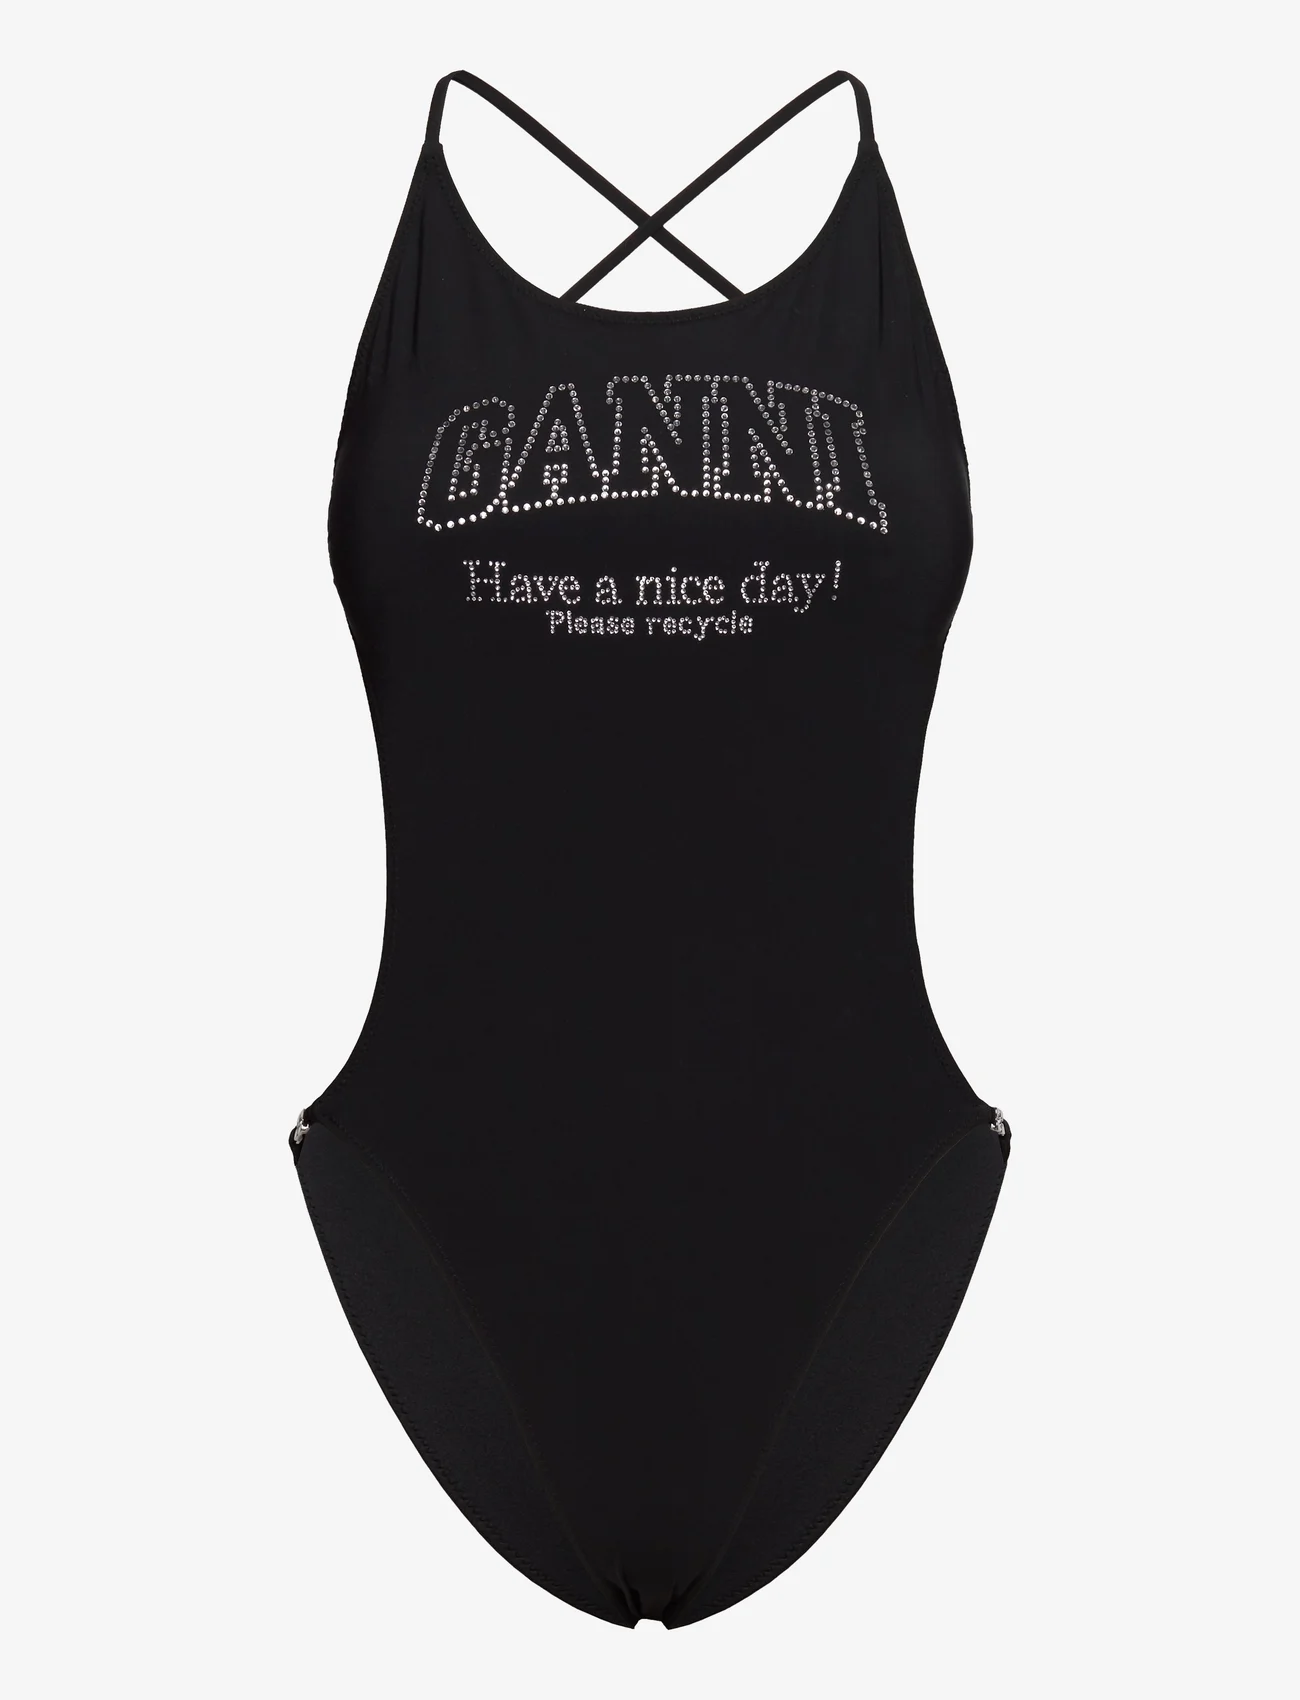 Ganni - Recycled Matte - swimsuits - black - 0